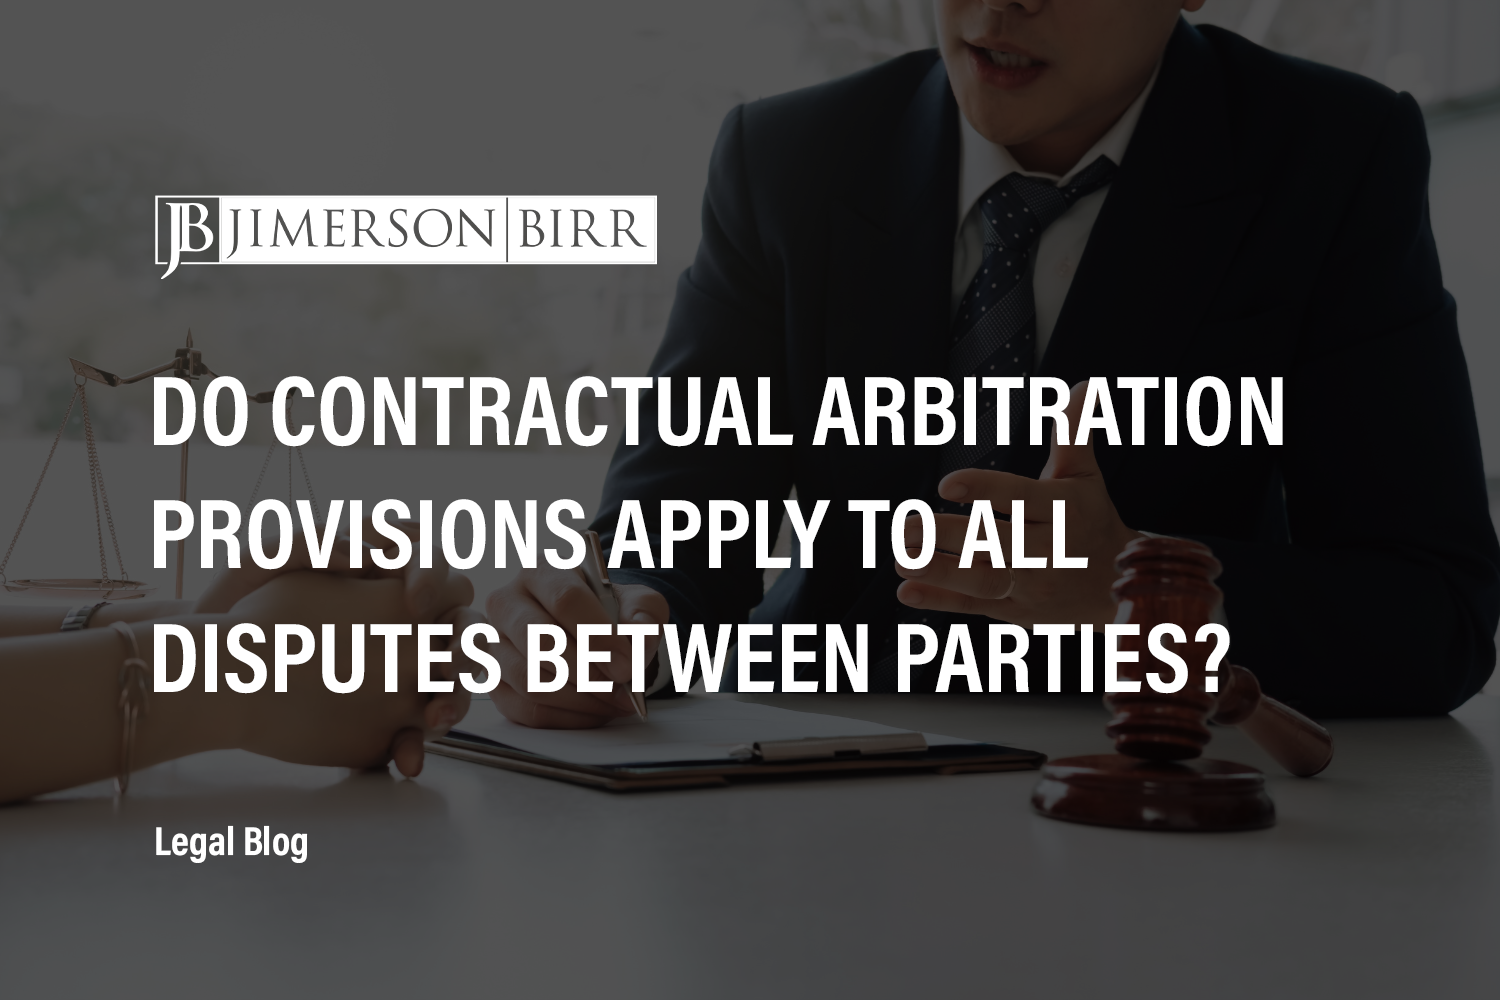 Do Contractual Arbitration Provisions Apply to All Disputes Between Parties?